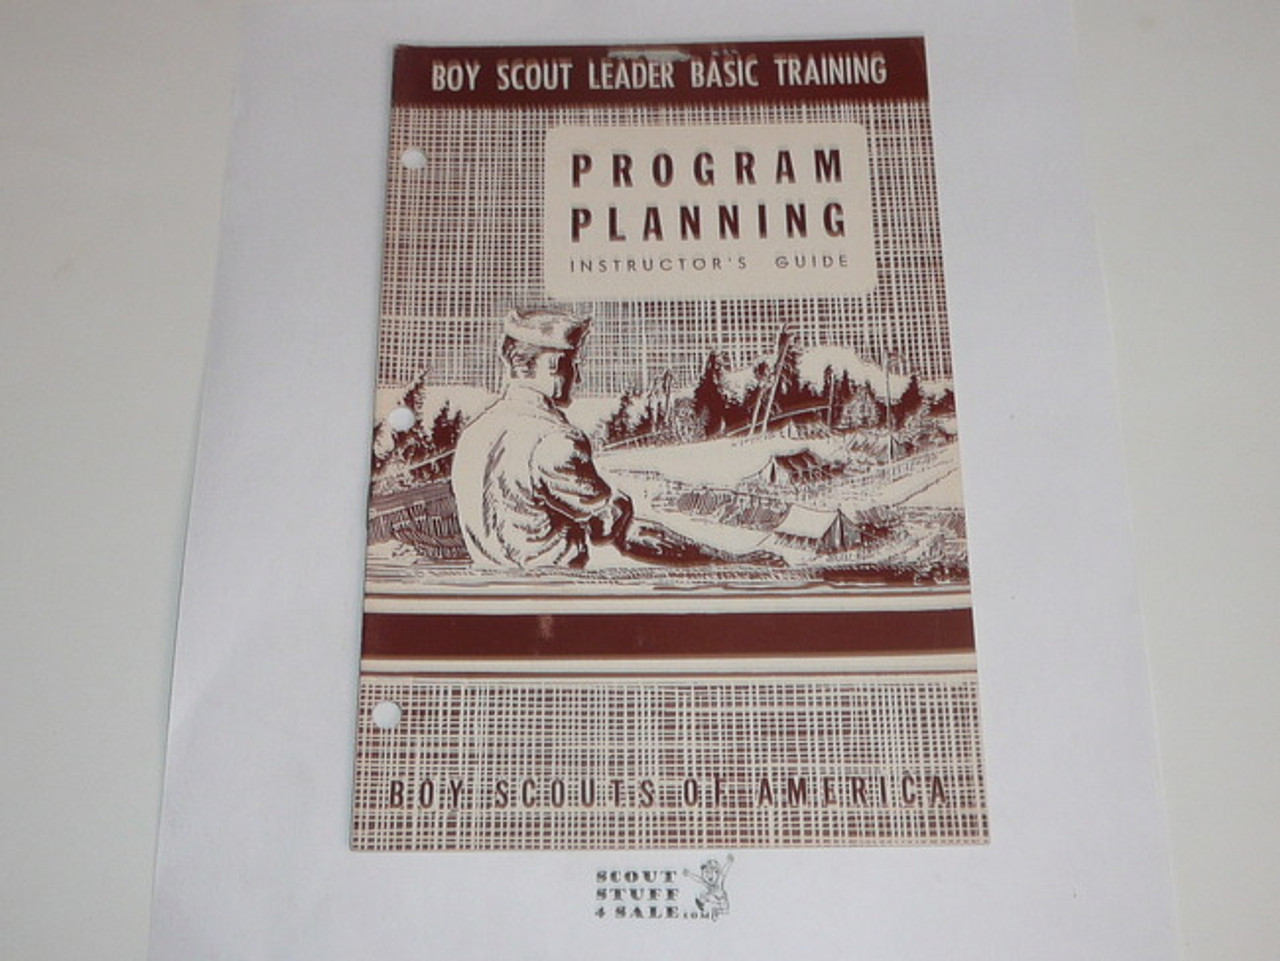 Boy Scout Leader Basic Training, Program Planning Instructor's Guide, 1-54 printing